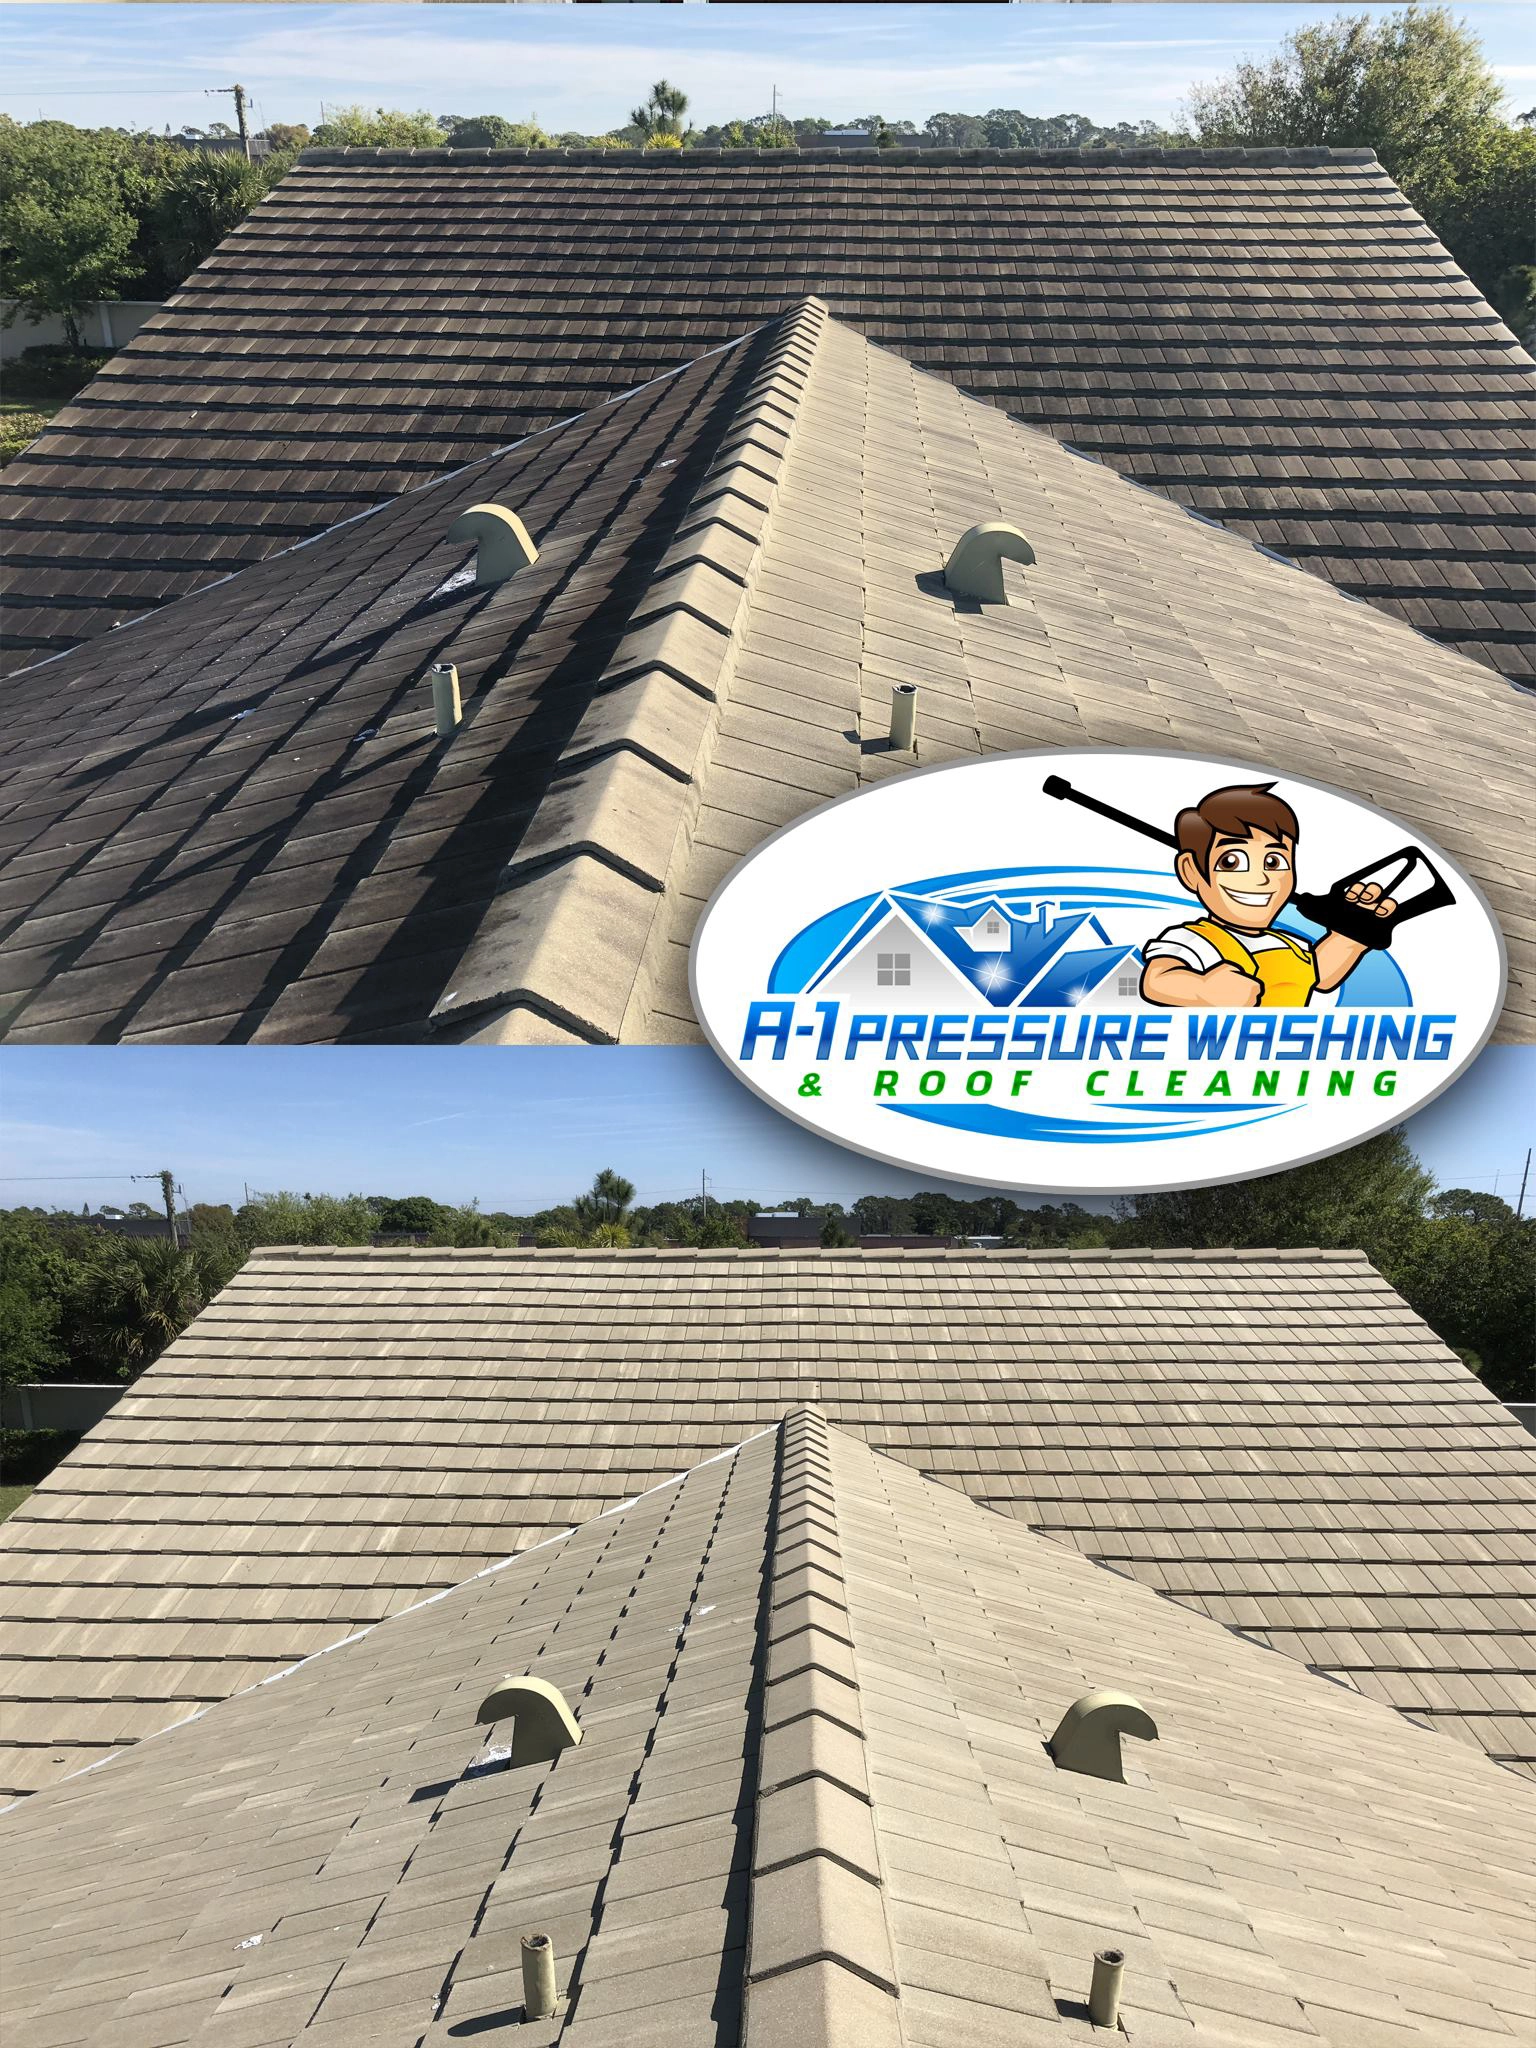 A-1 Pressure Washing & Roof Cleaning | 941-815-8454 